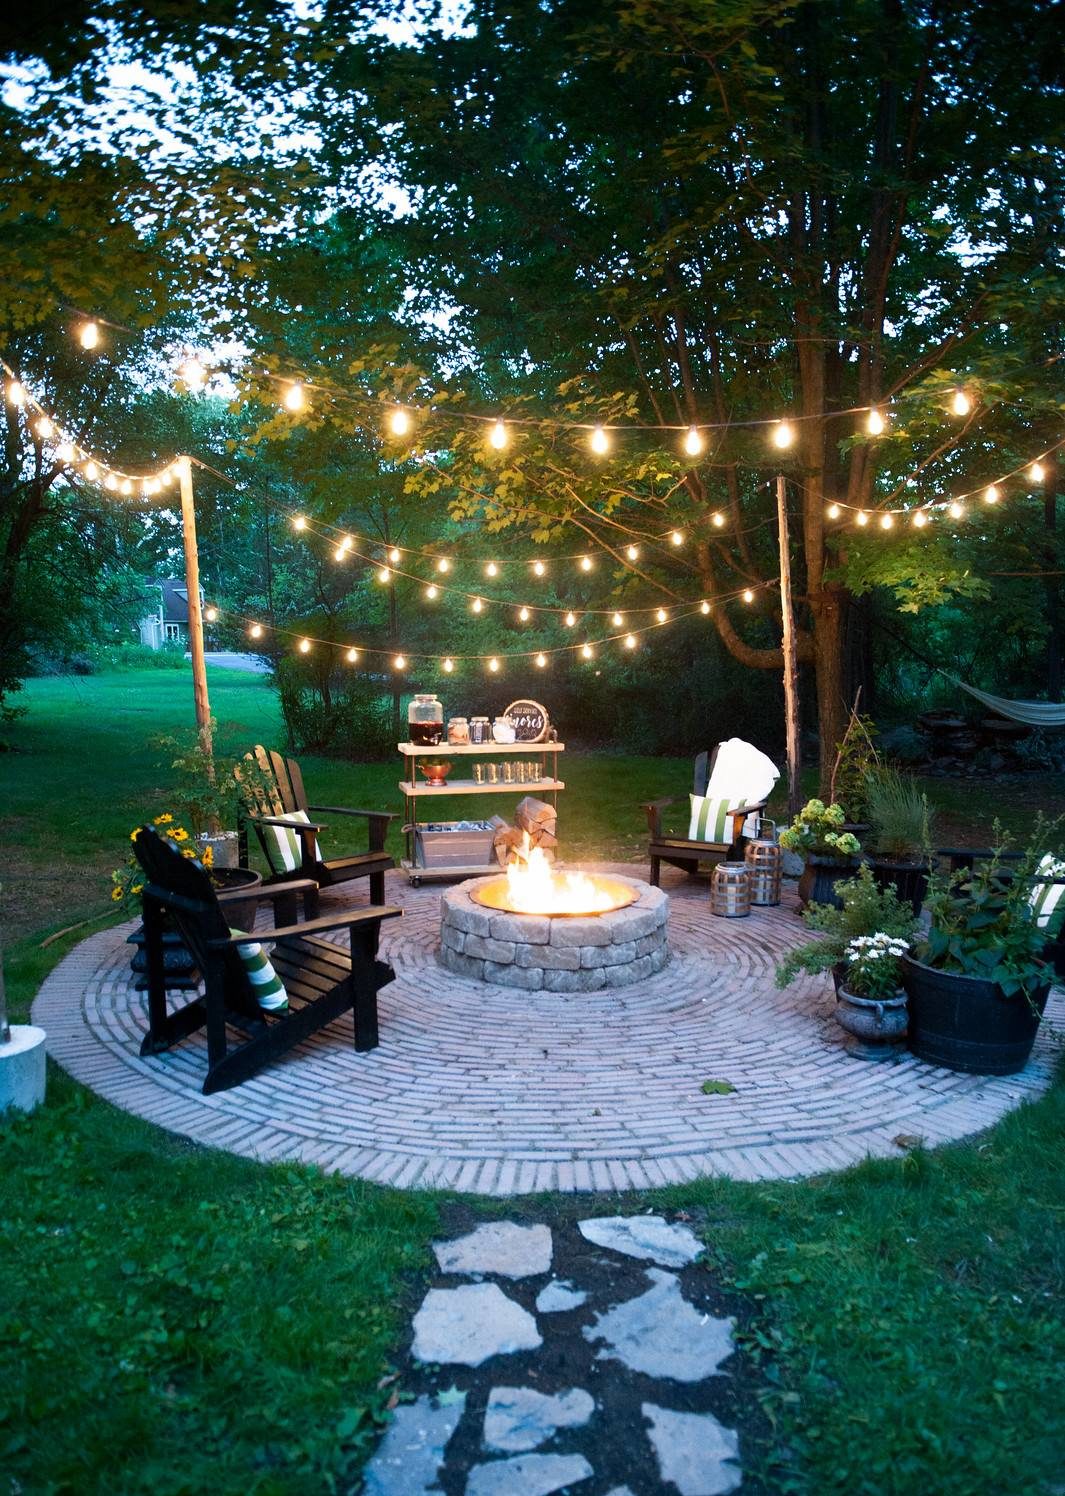 Unique Fire Pit Area Ideas For, Can You Make A Fire Pit In Your Backyard